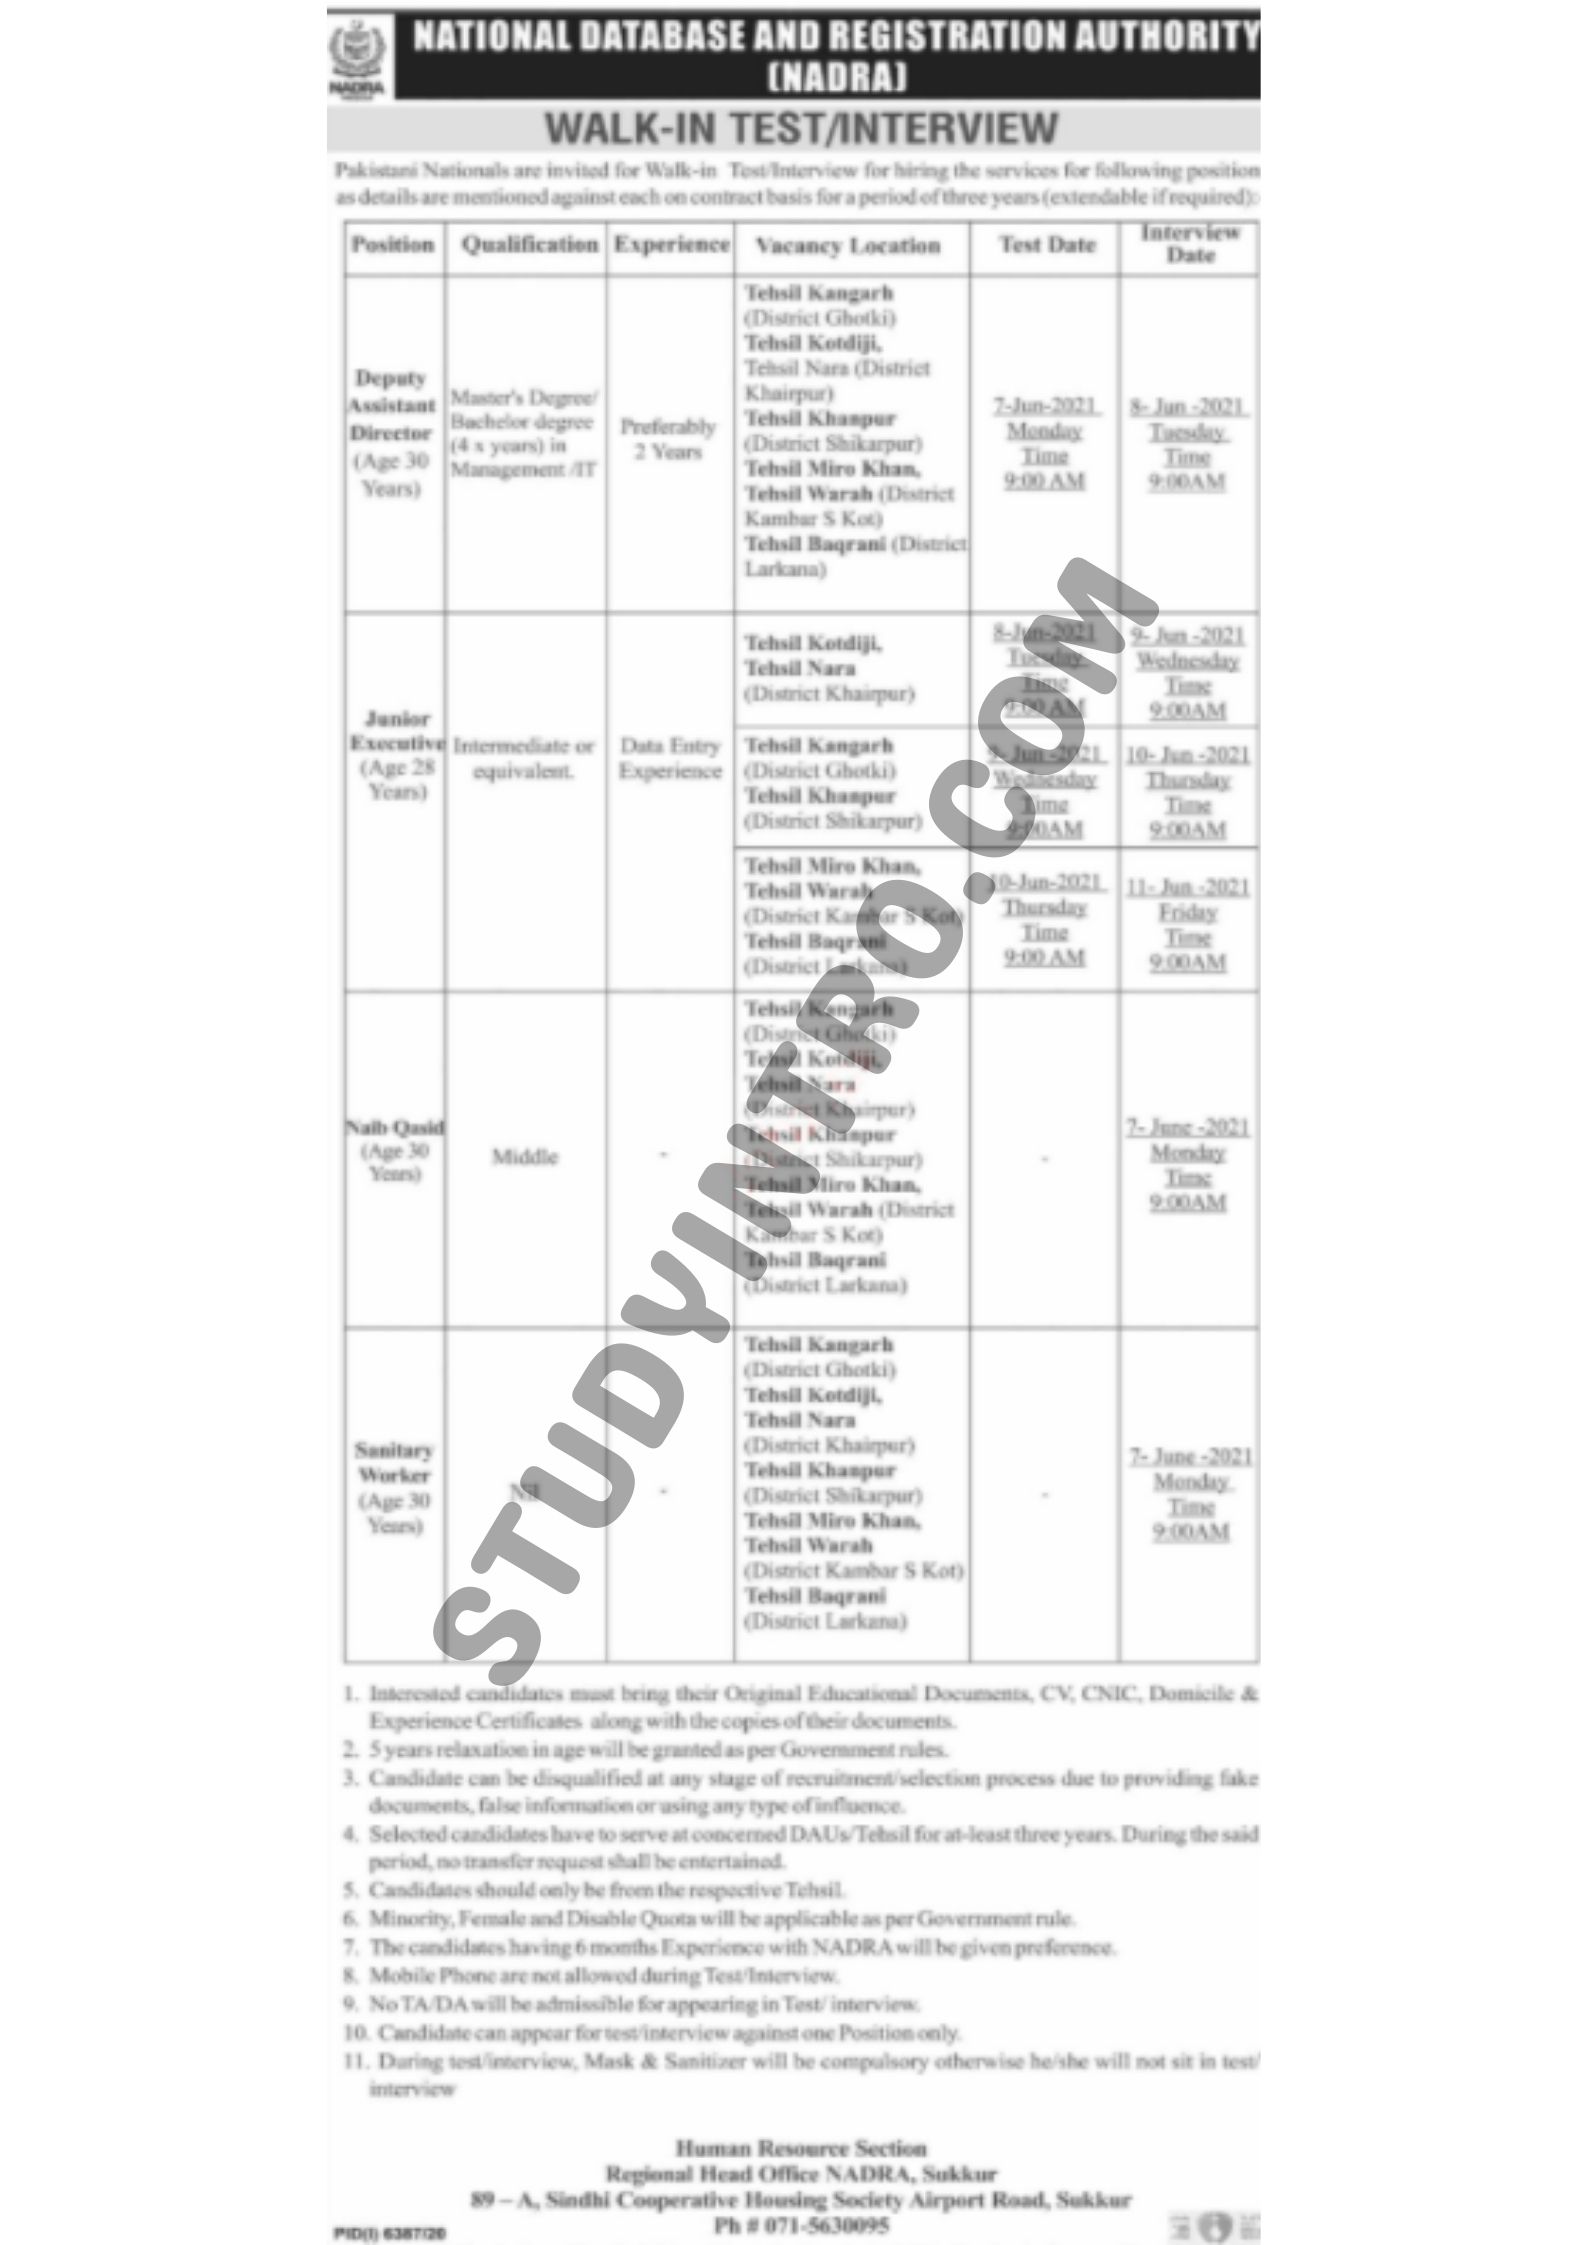 Government Jobs in NADRA 2021